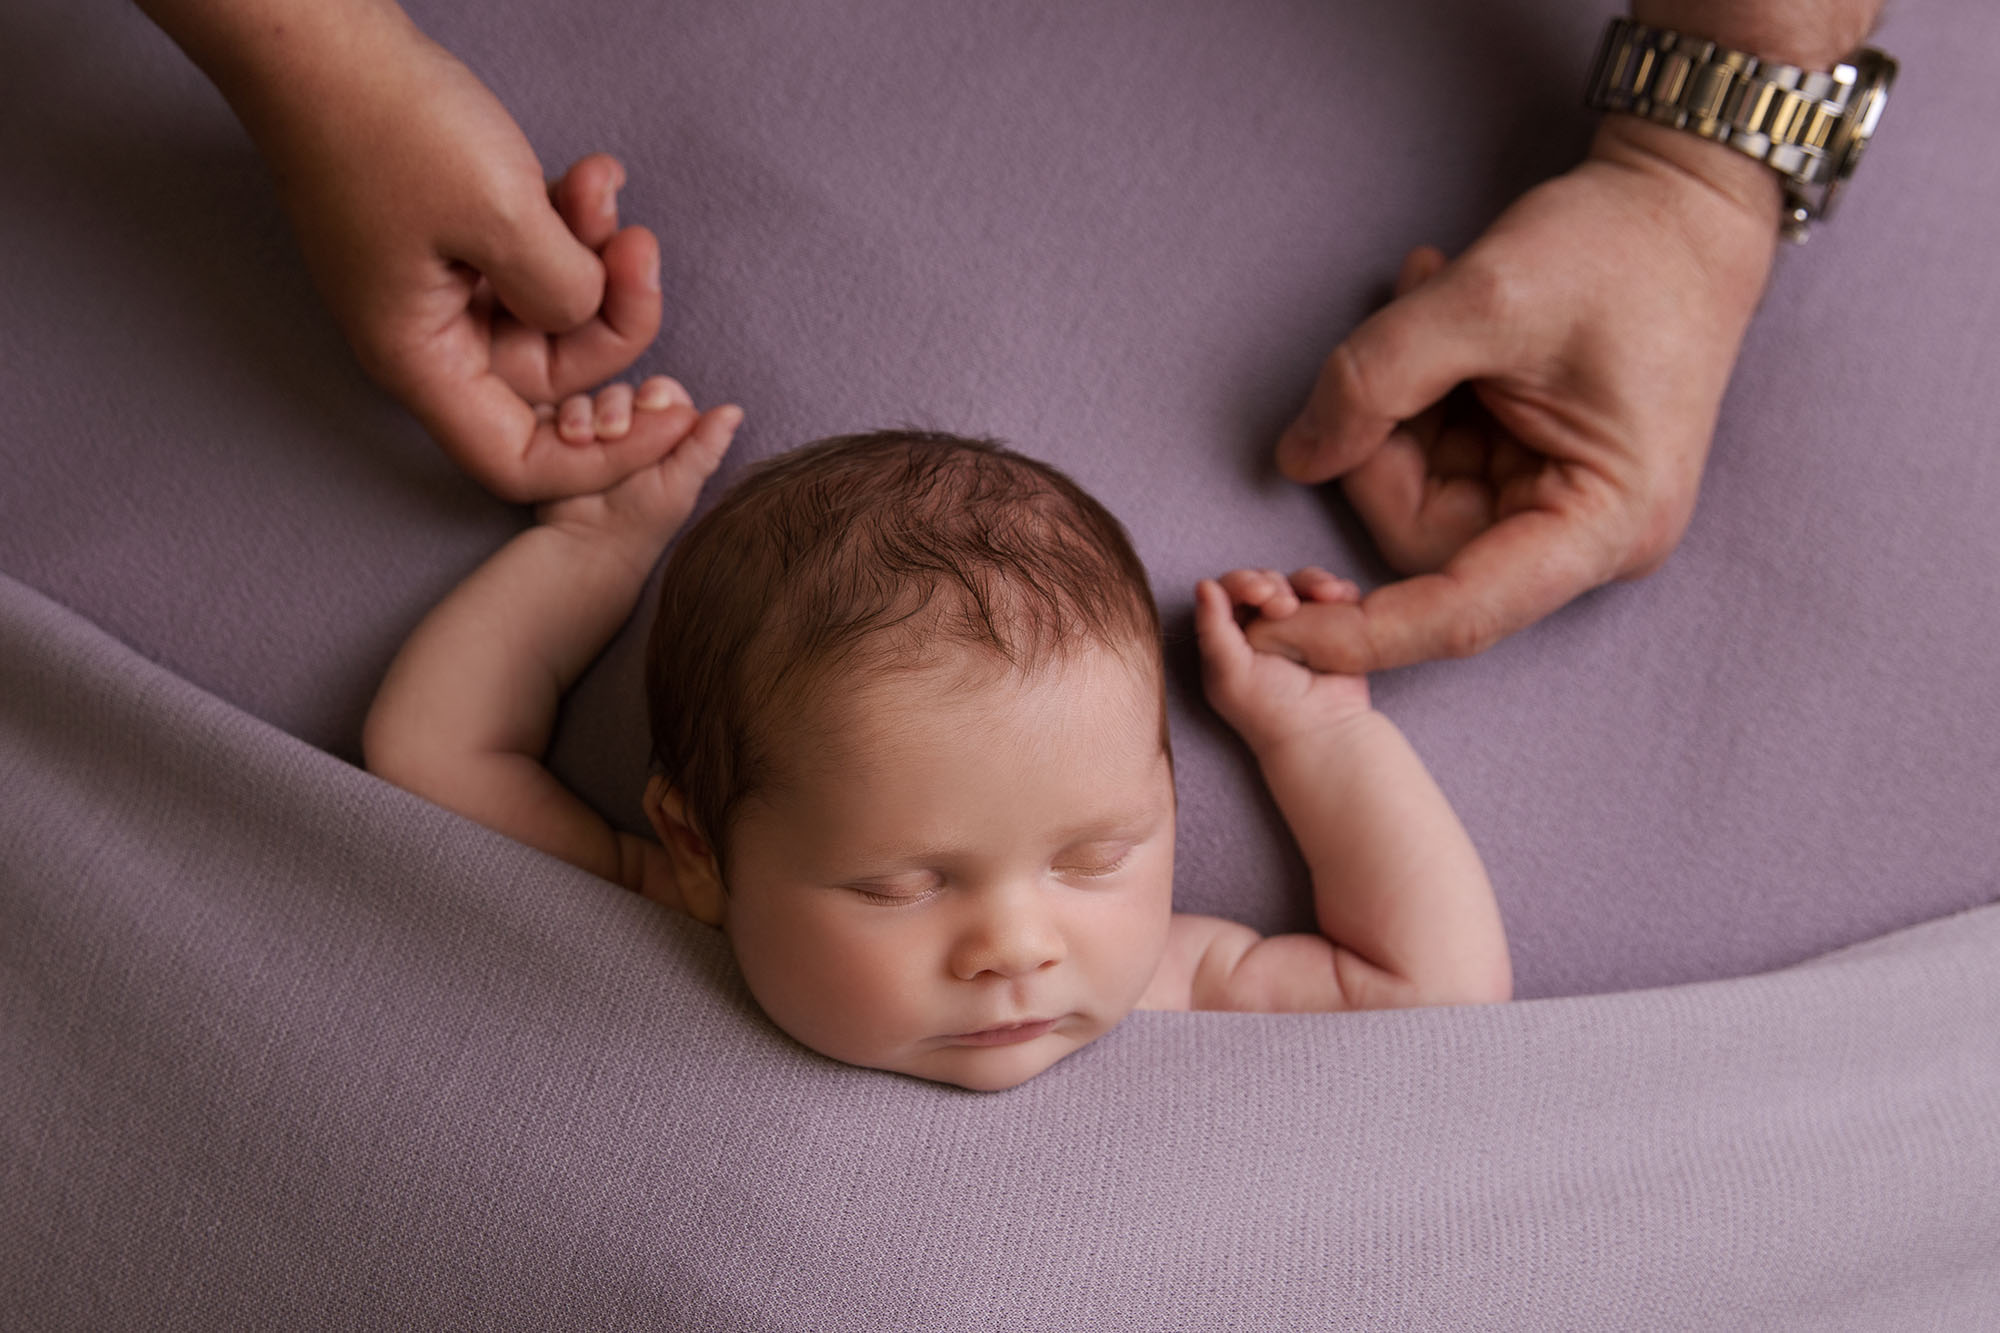 A newborn photoshoot during a global pandemic